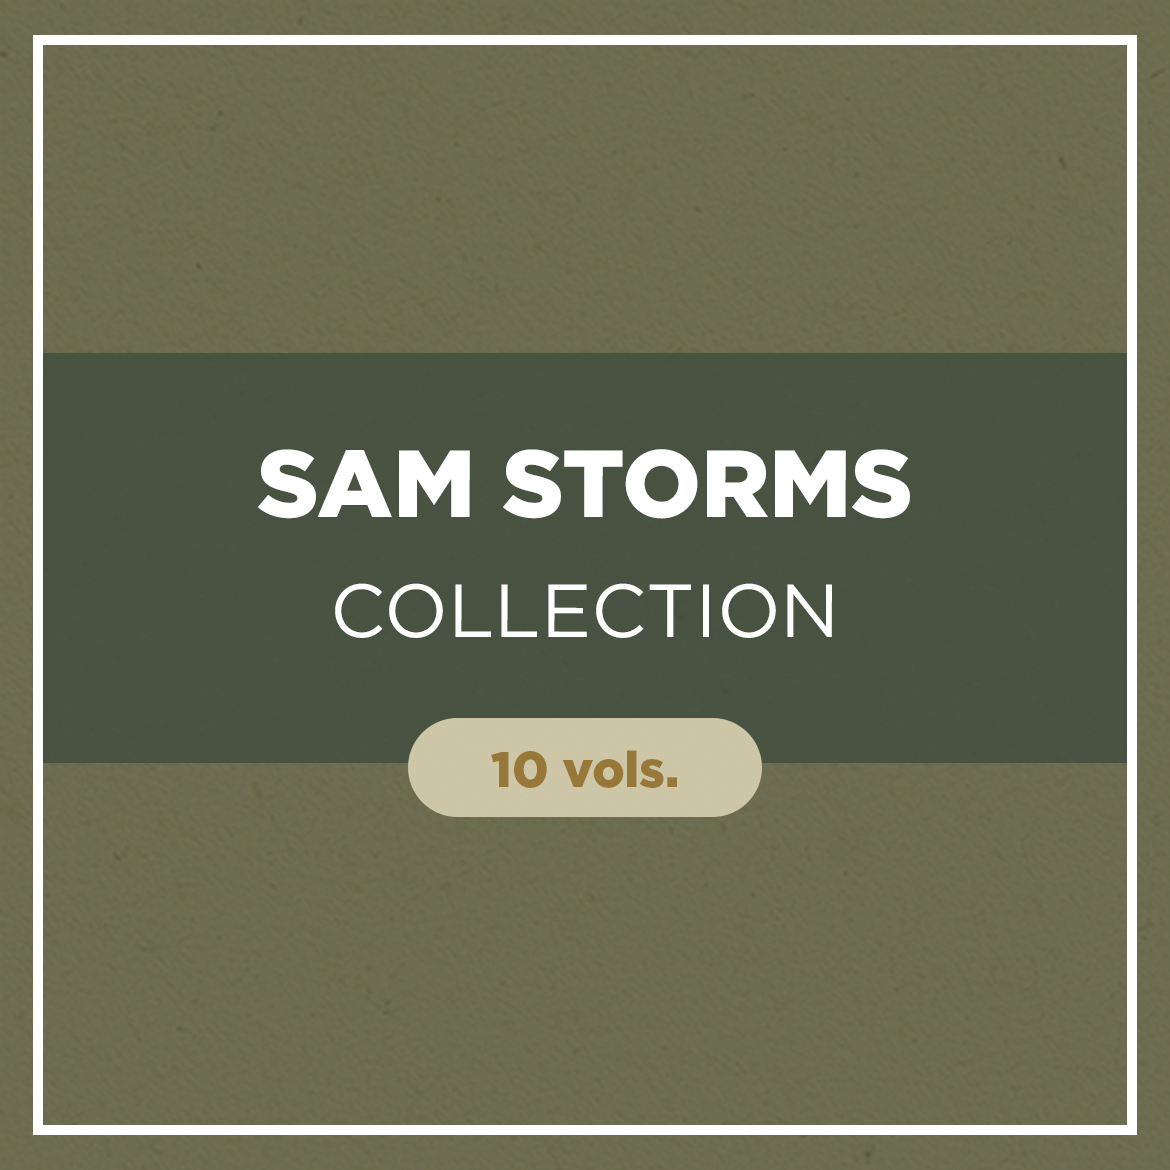 Sam Storms Collection (10 vols.)